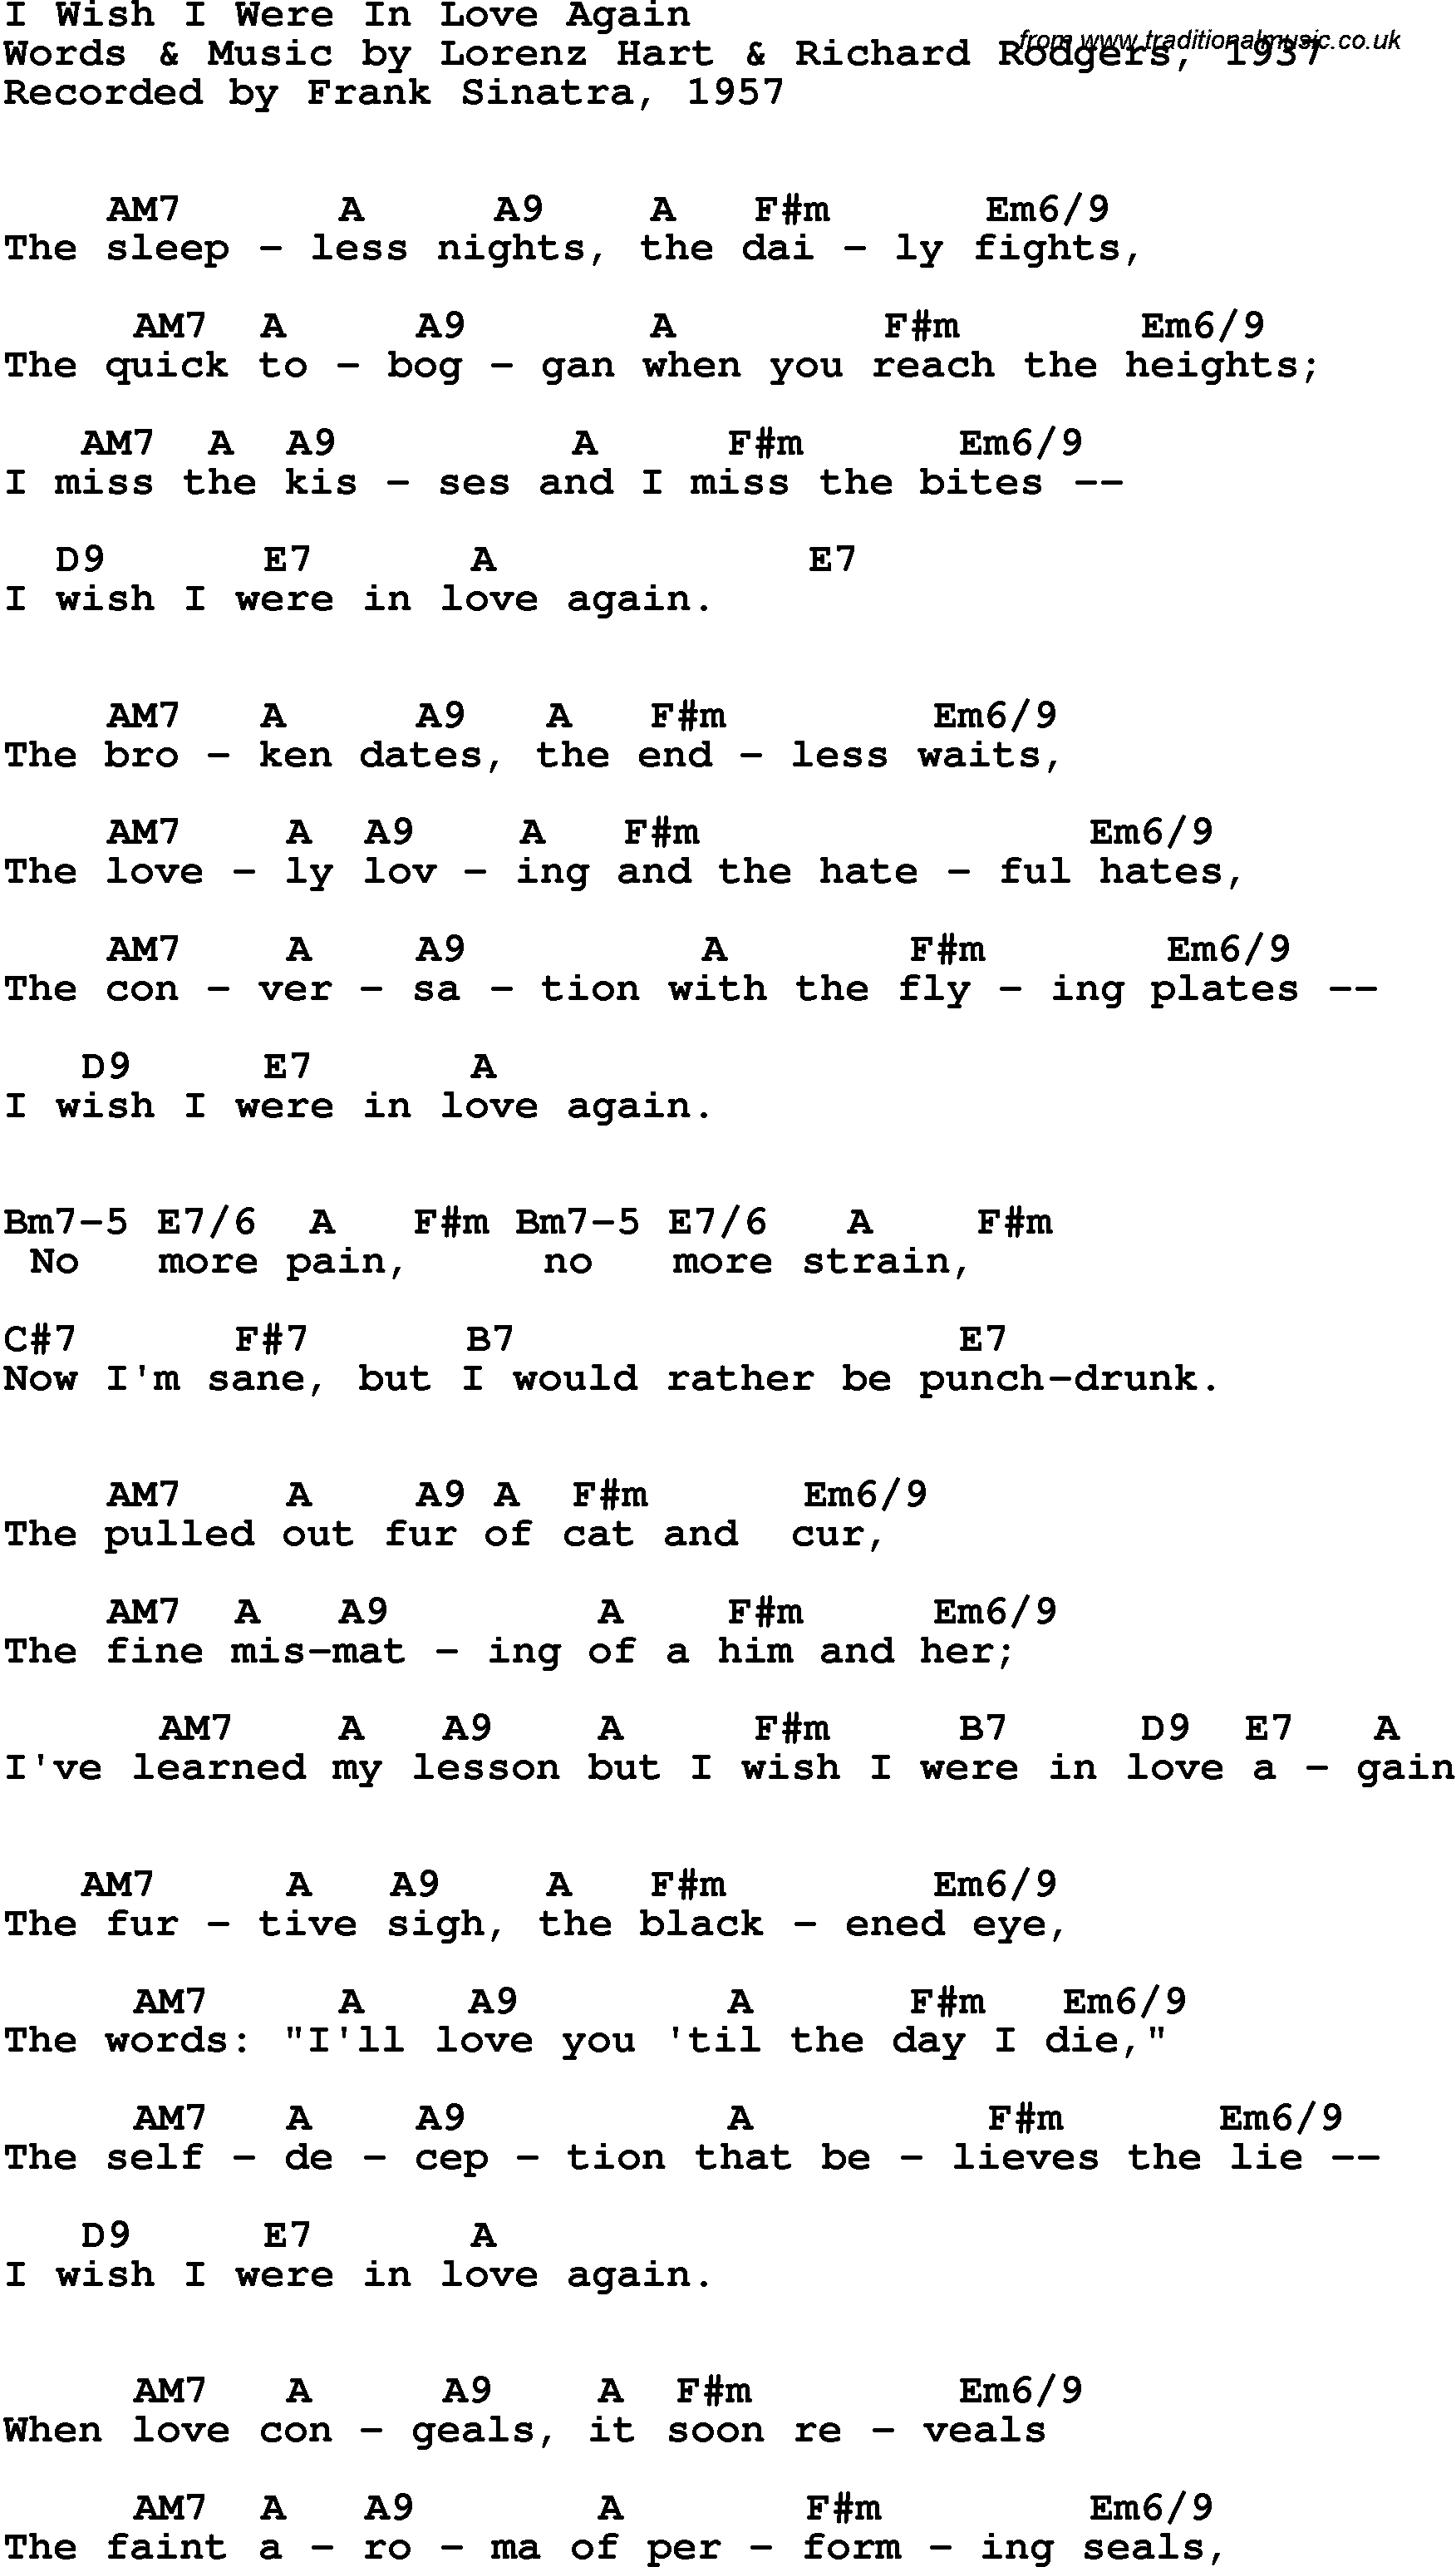 Song Lyrics with guitar chords for I Wish I Were In Love Again - Frank Sinatra, 1957